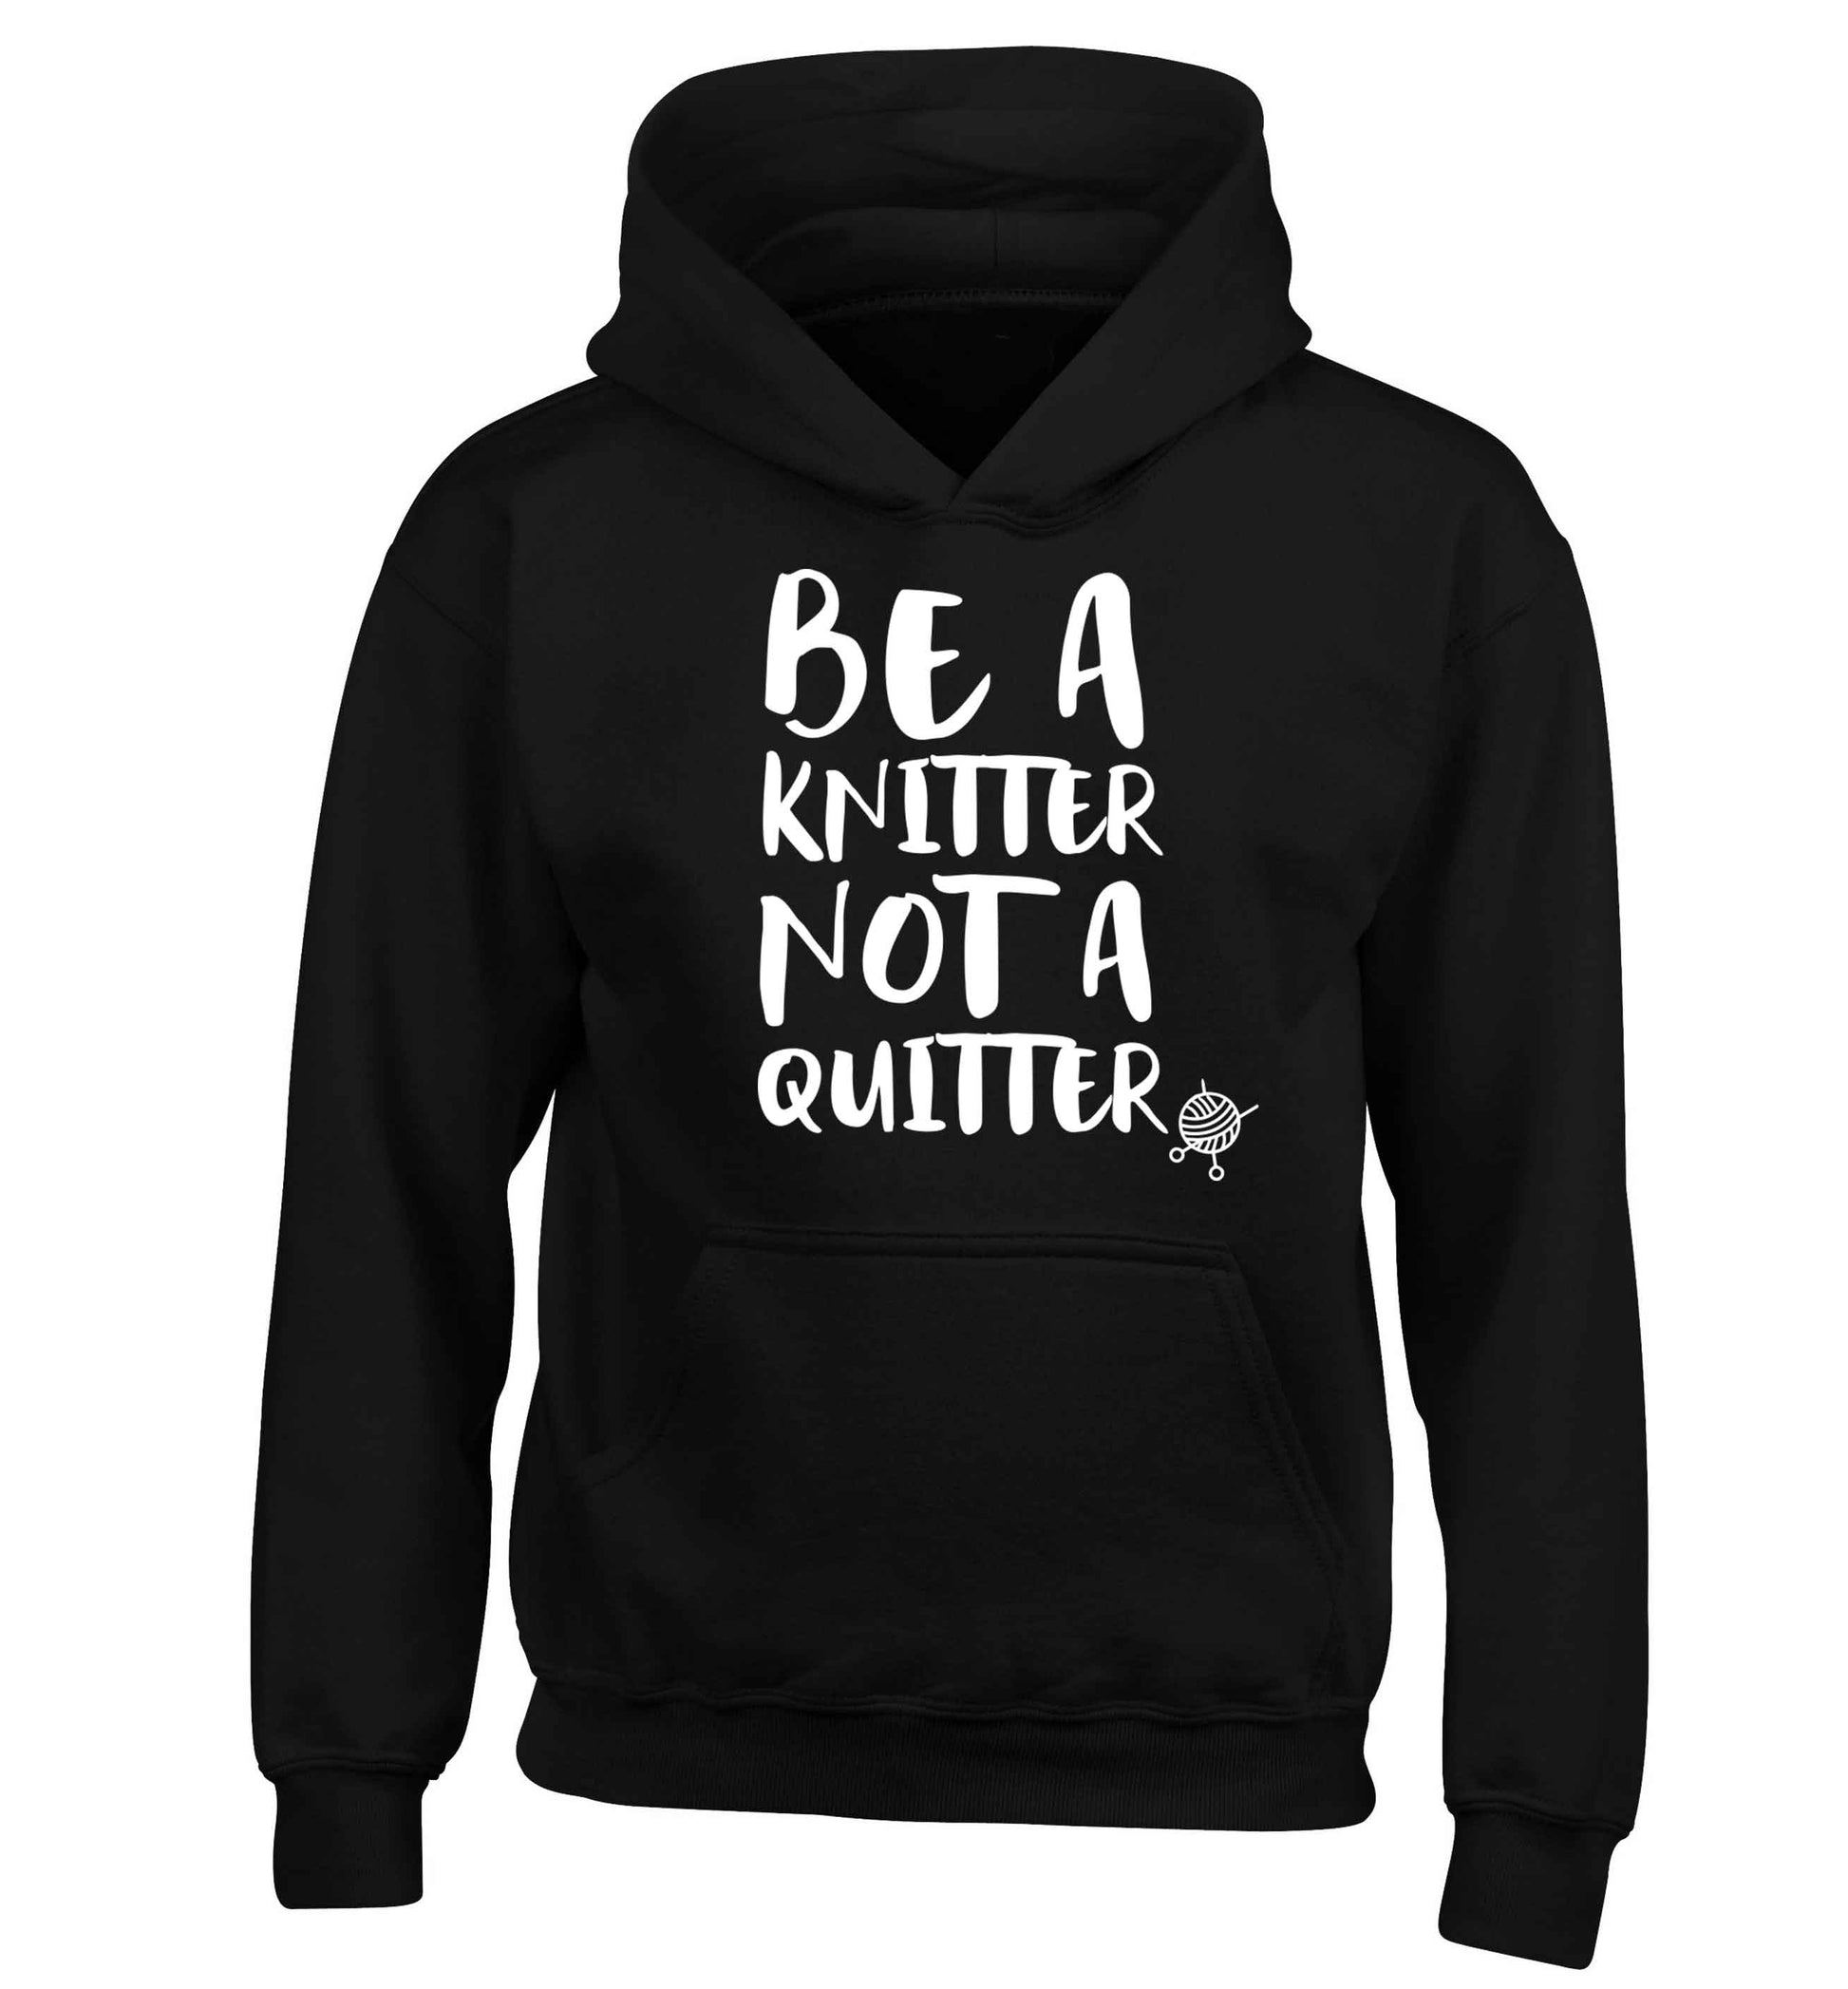 Be a knitter not a quitter children's black hoodie 12-13 Years